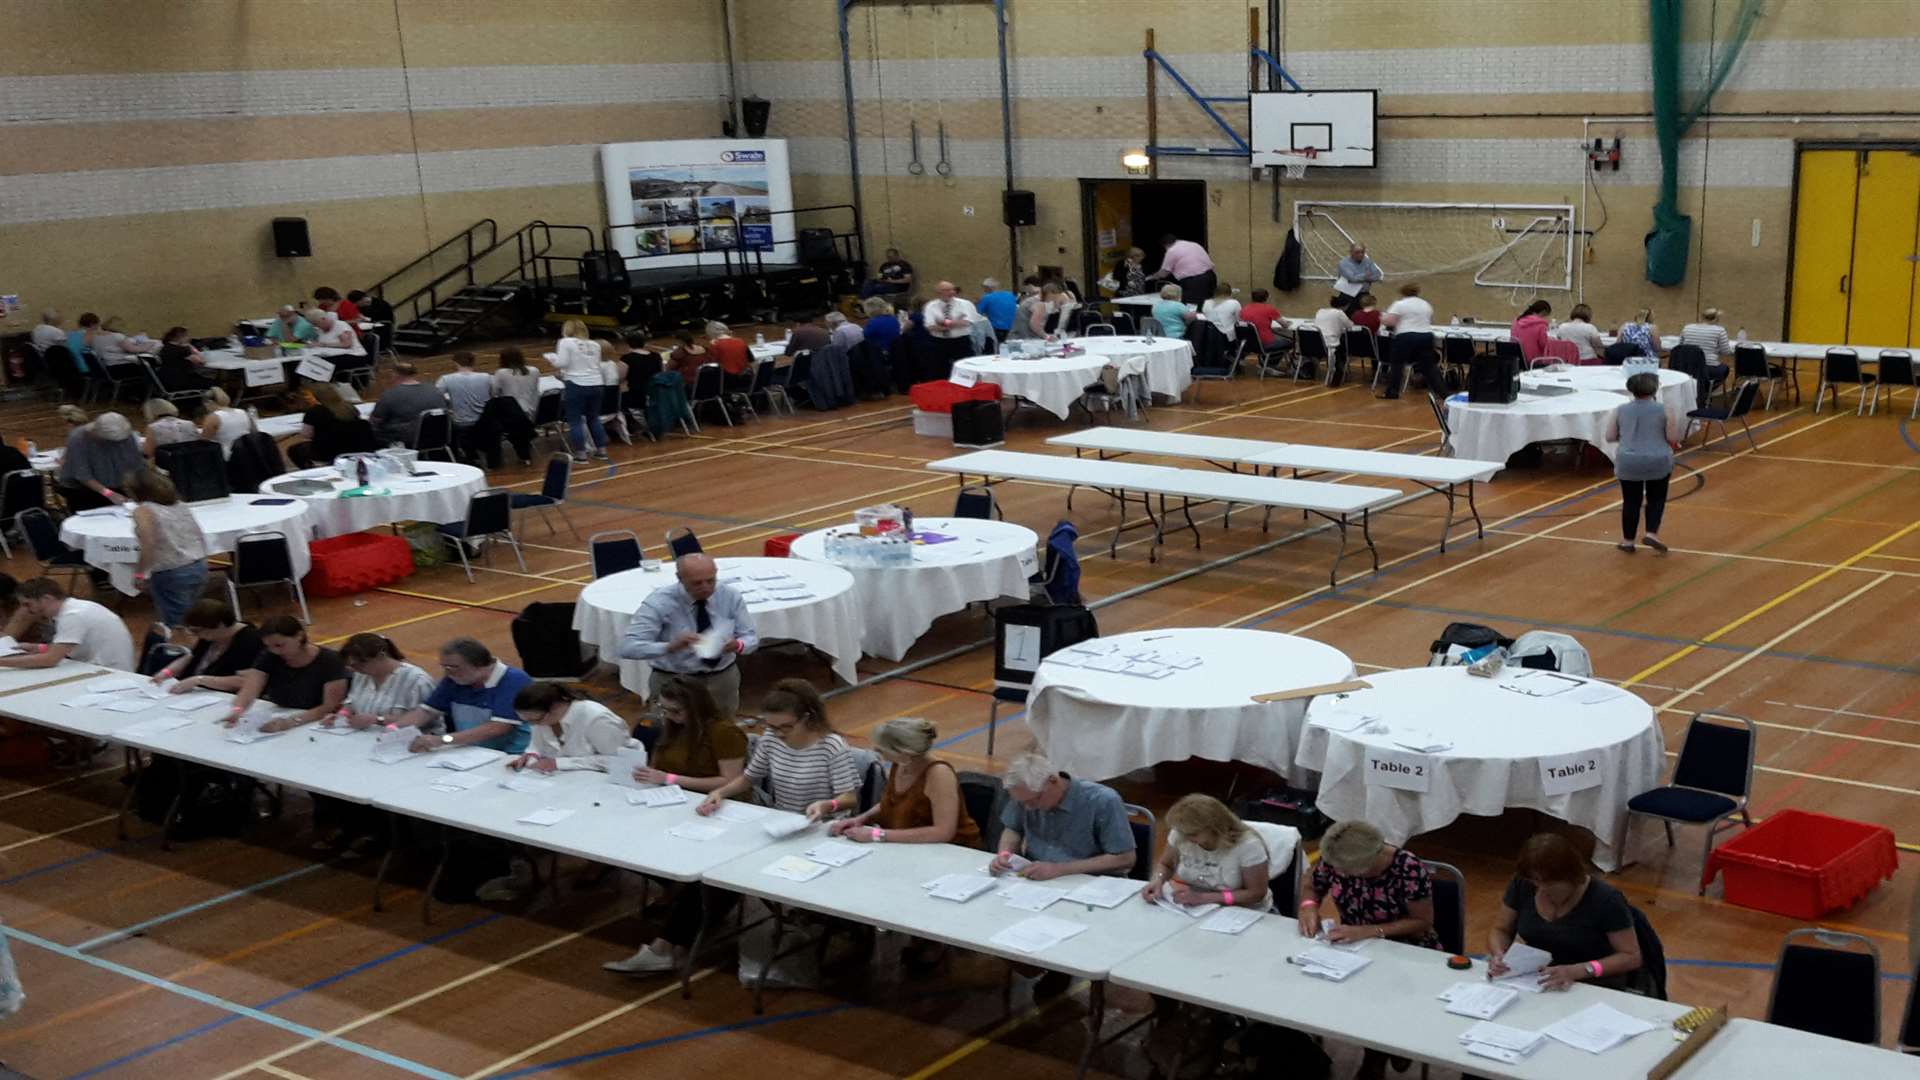 Counting is underway at Swallows Leisure Centre in Sittingbourne